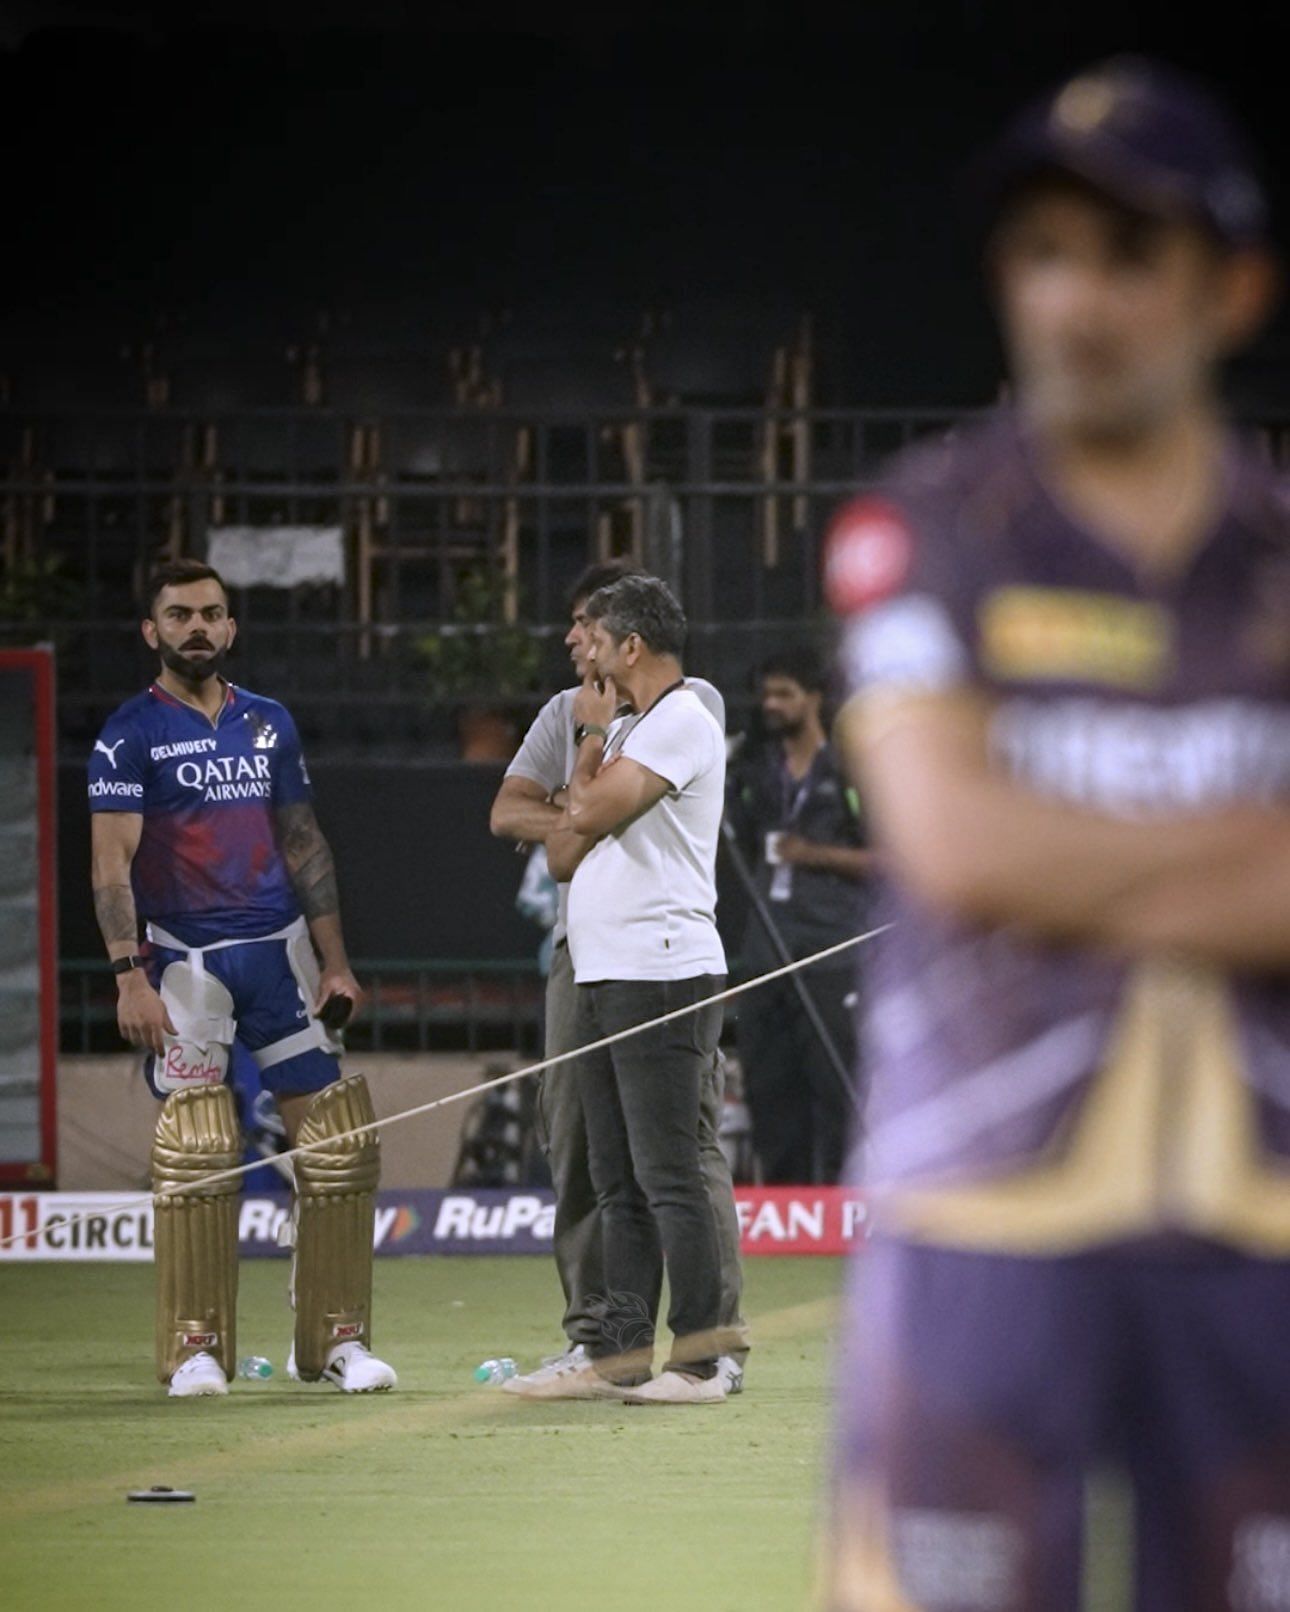 RCB and KKR share a heated rivalry against each other. [KKR]